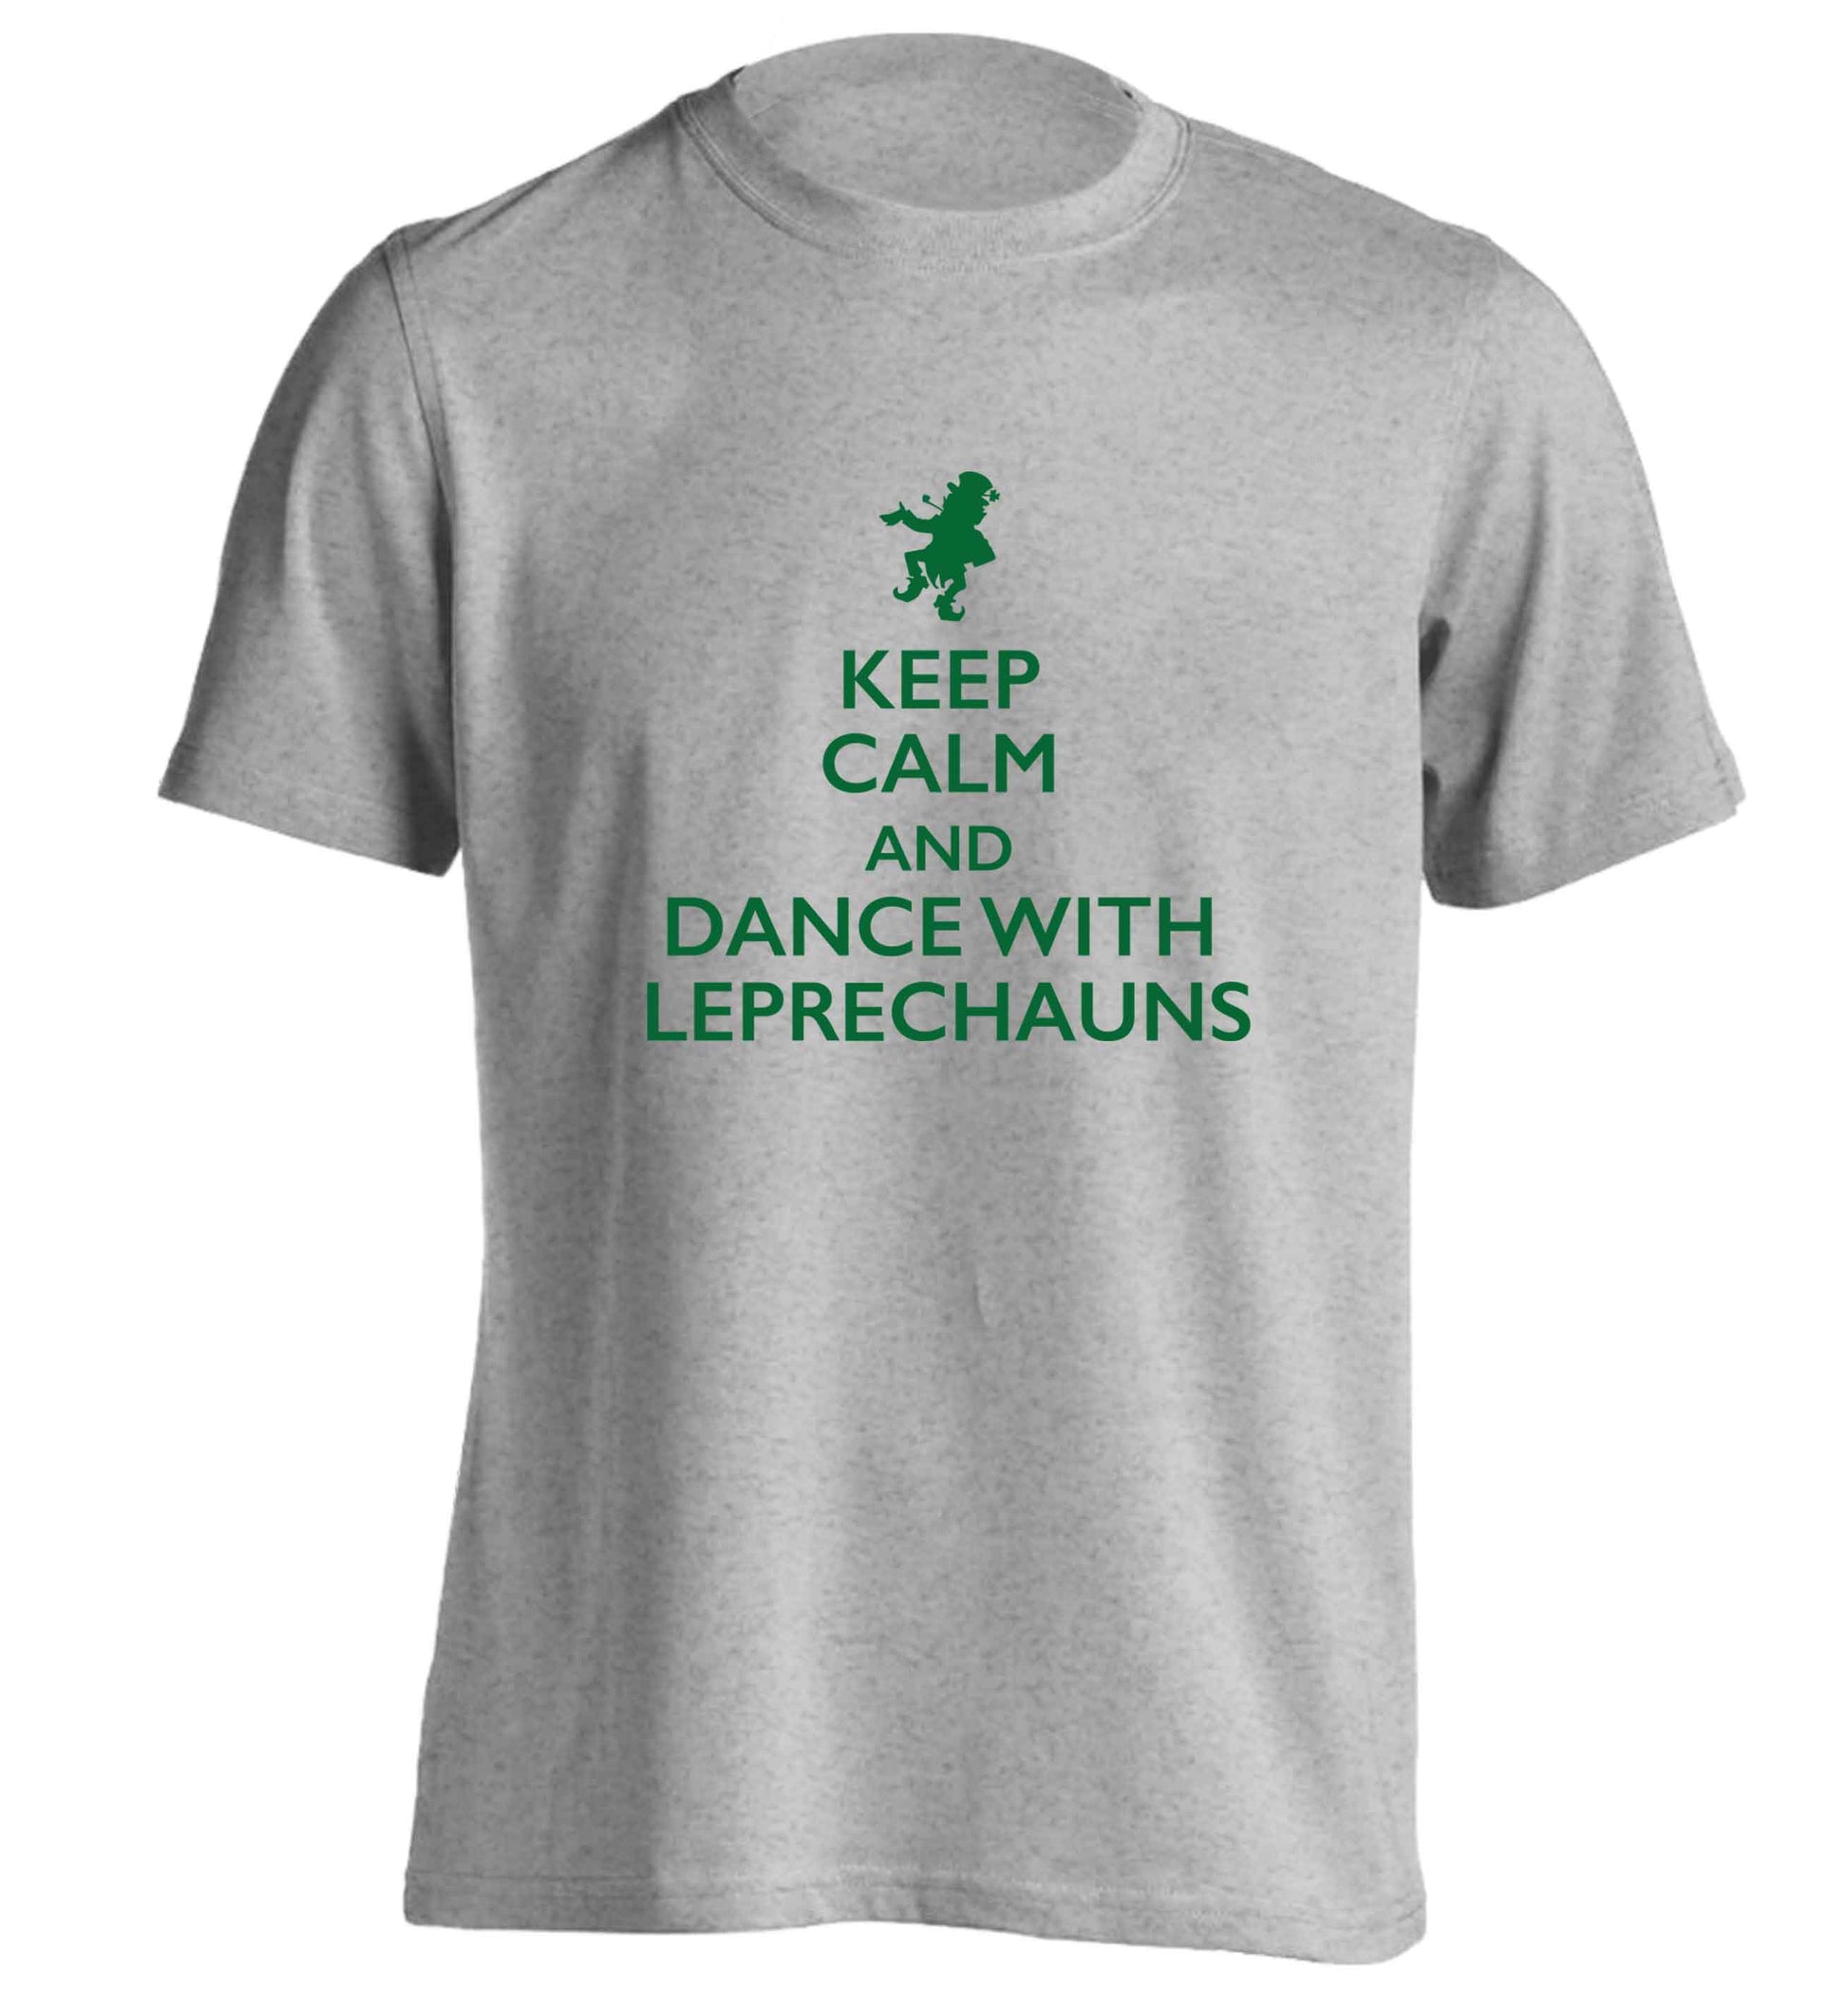 Keep calm and dance with leprechauns adults unisex grey Tshirt 2XL